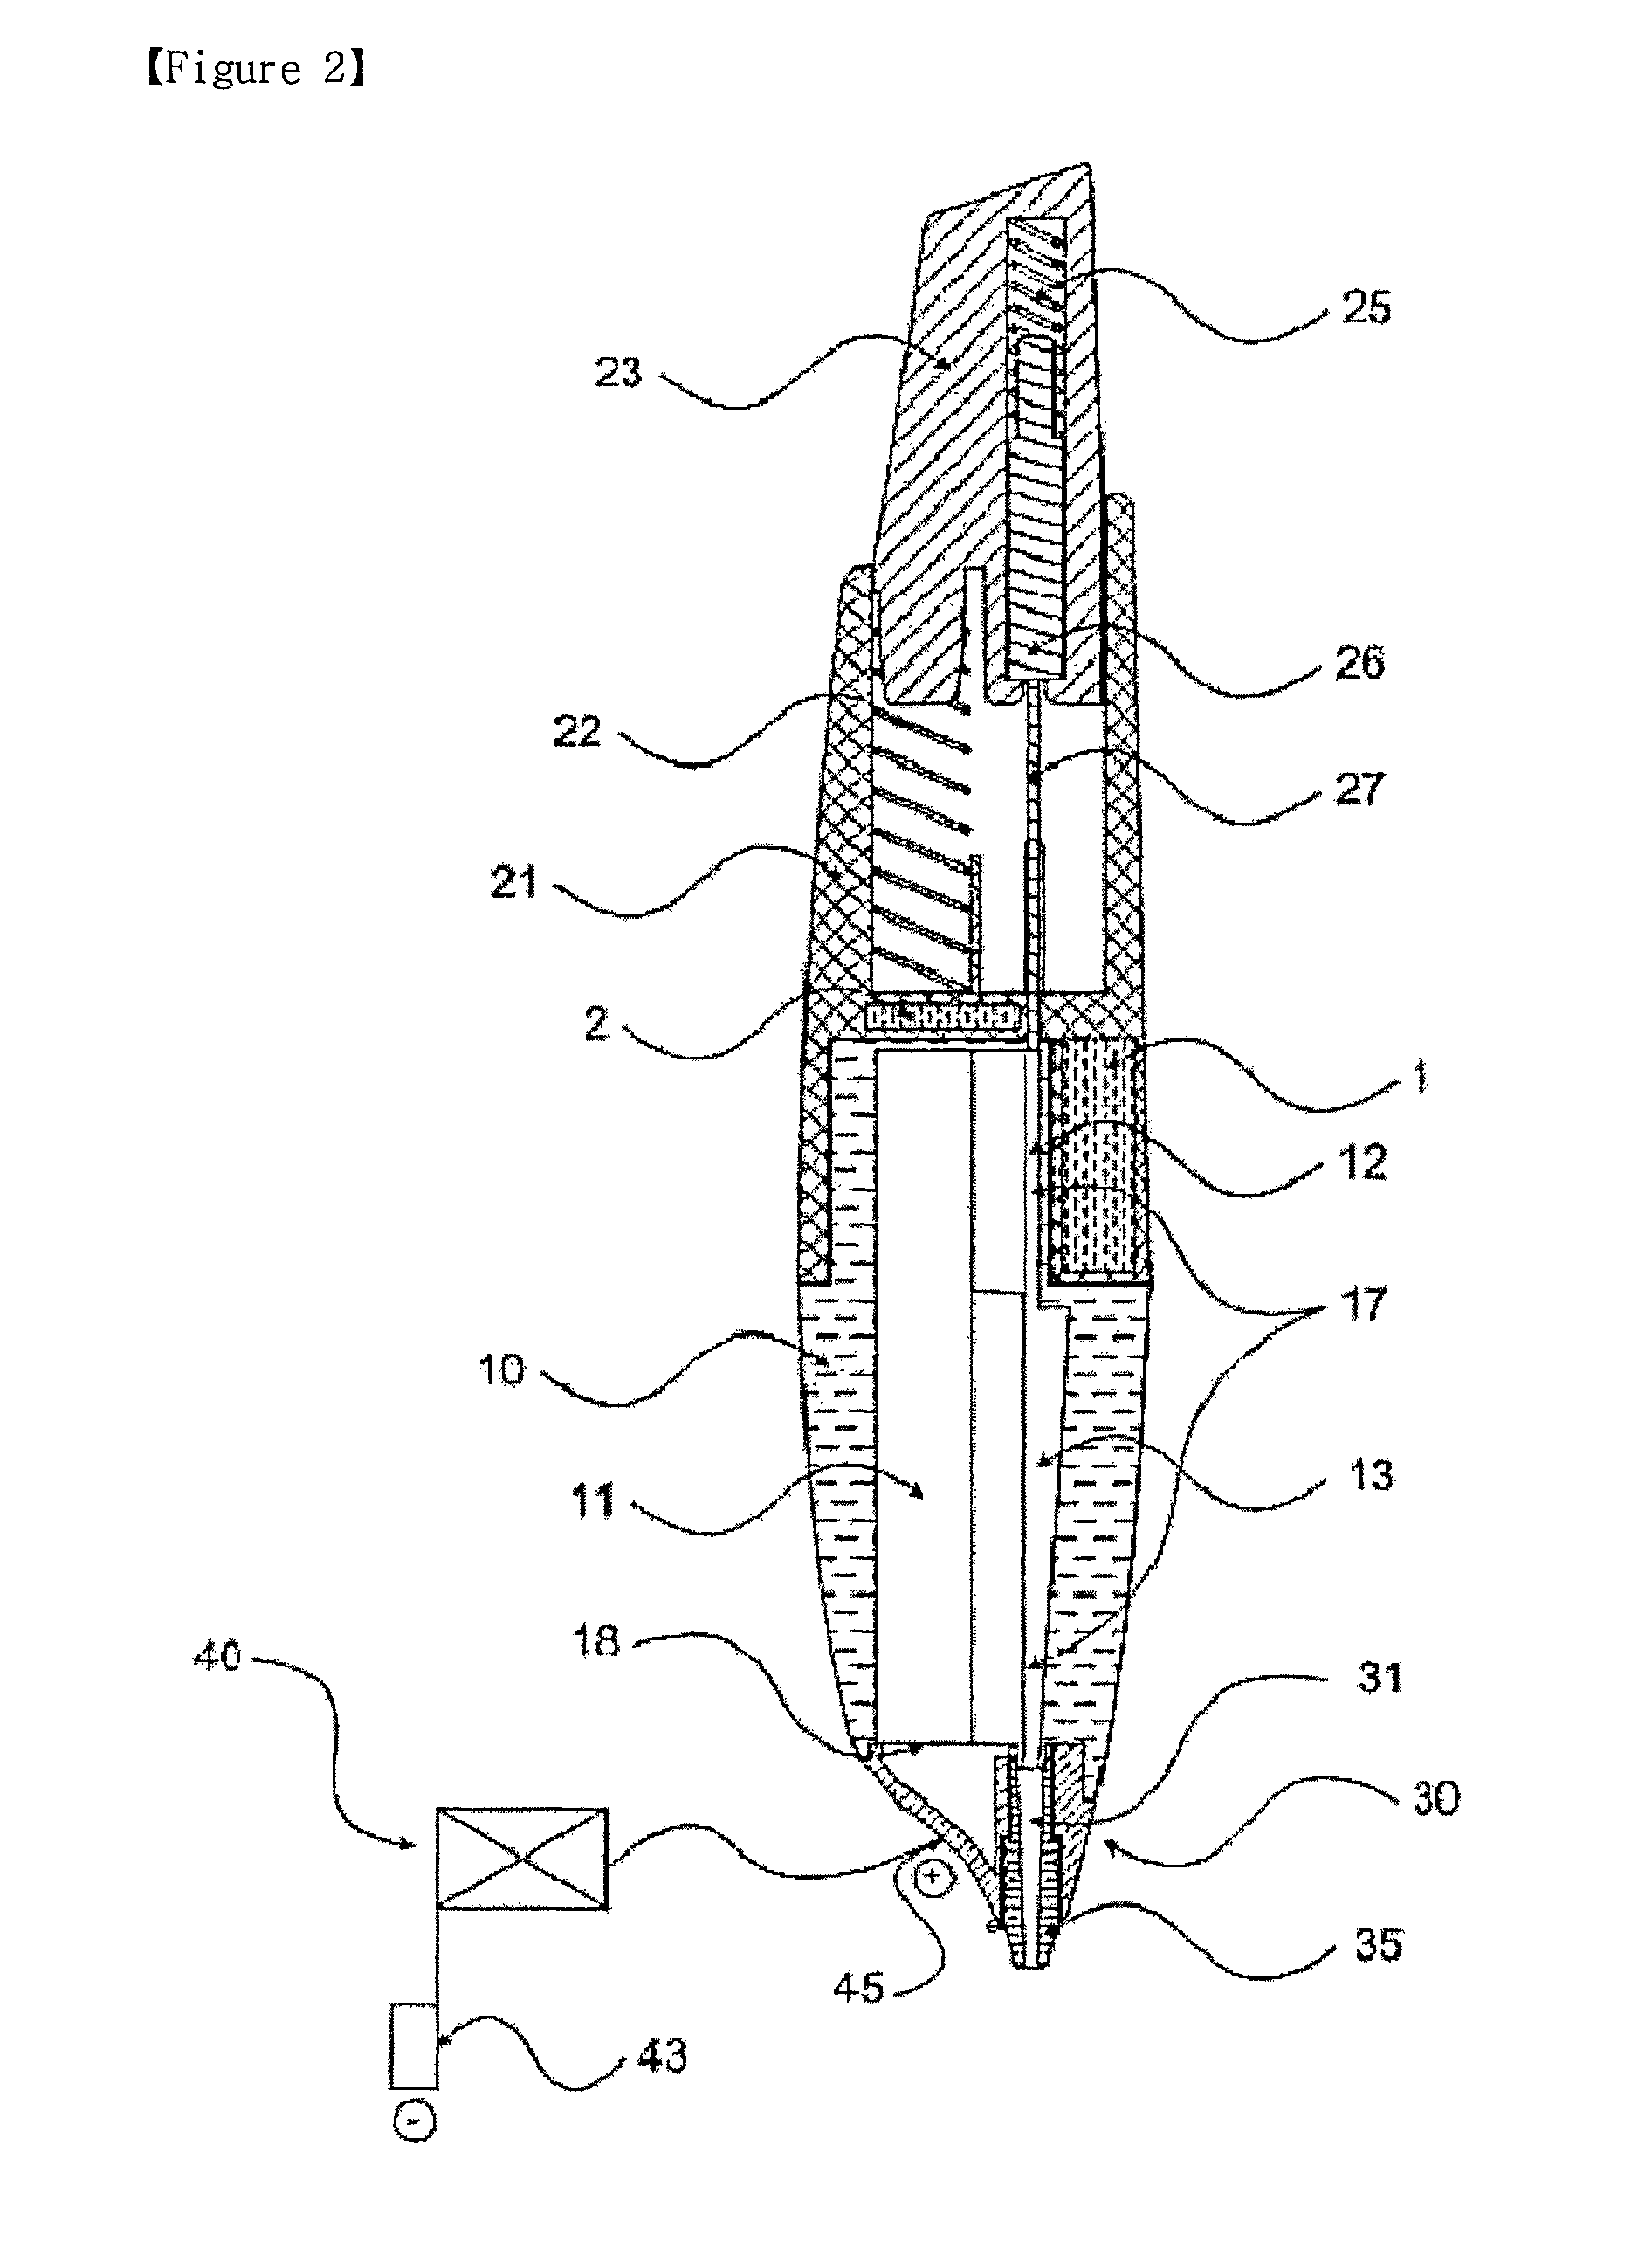 Consecutive acupuncture device